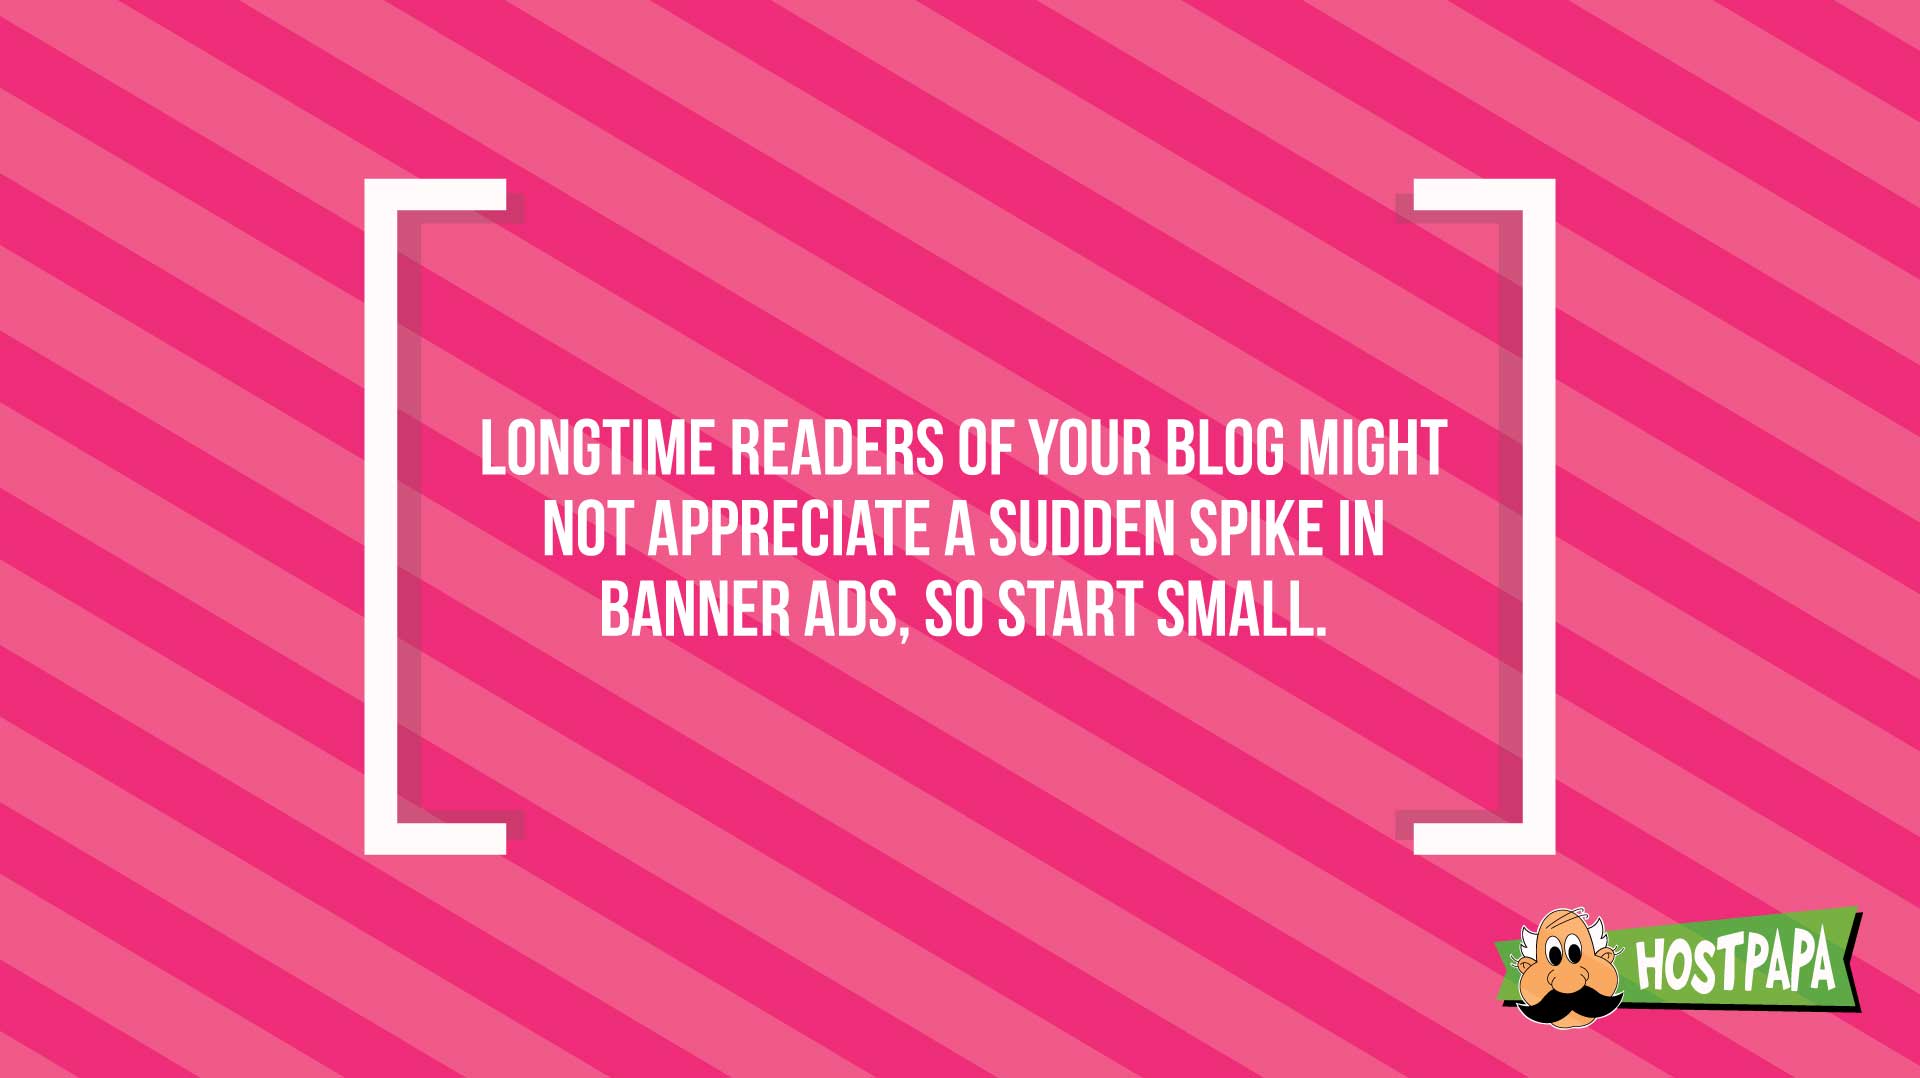 Longtime readers of your blog might not appreciate a sudden spike in banner ads